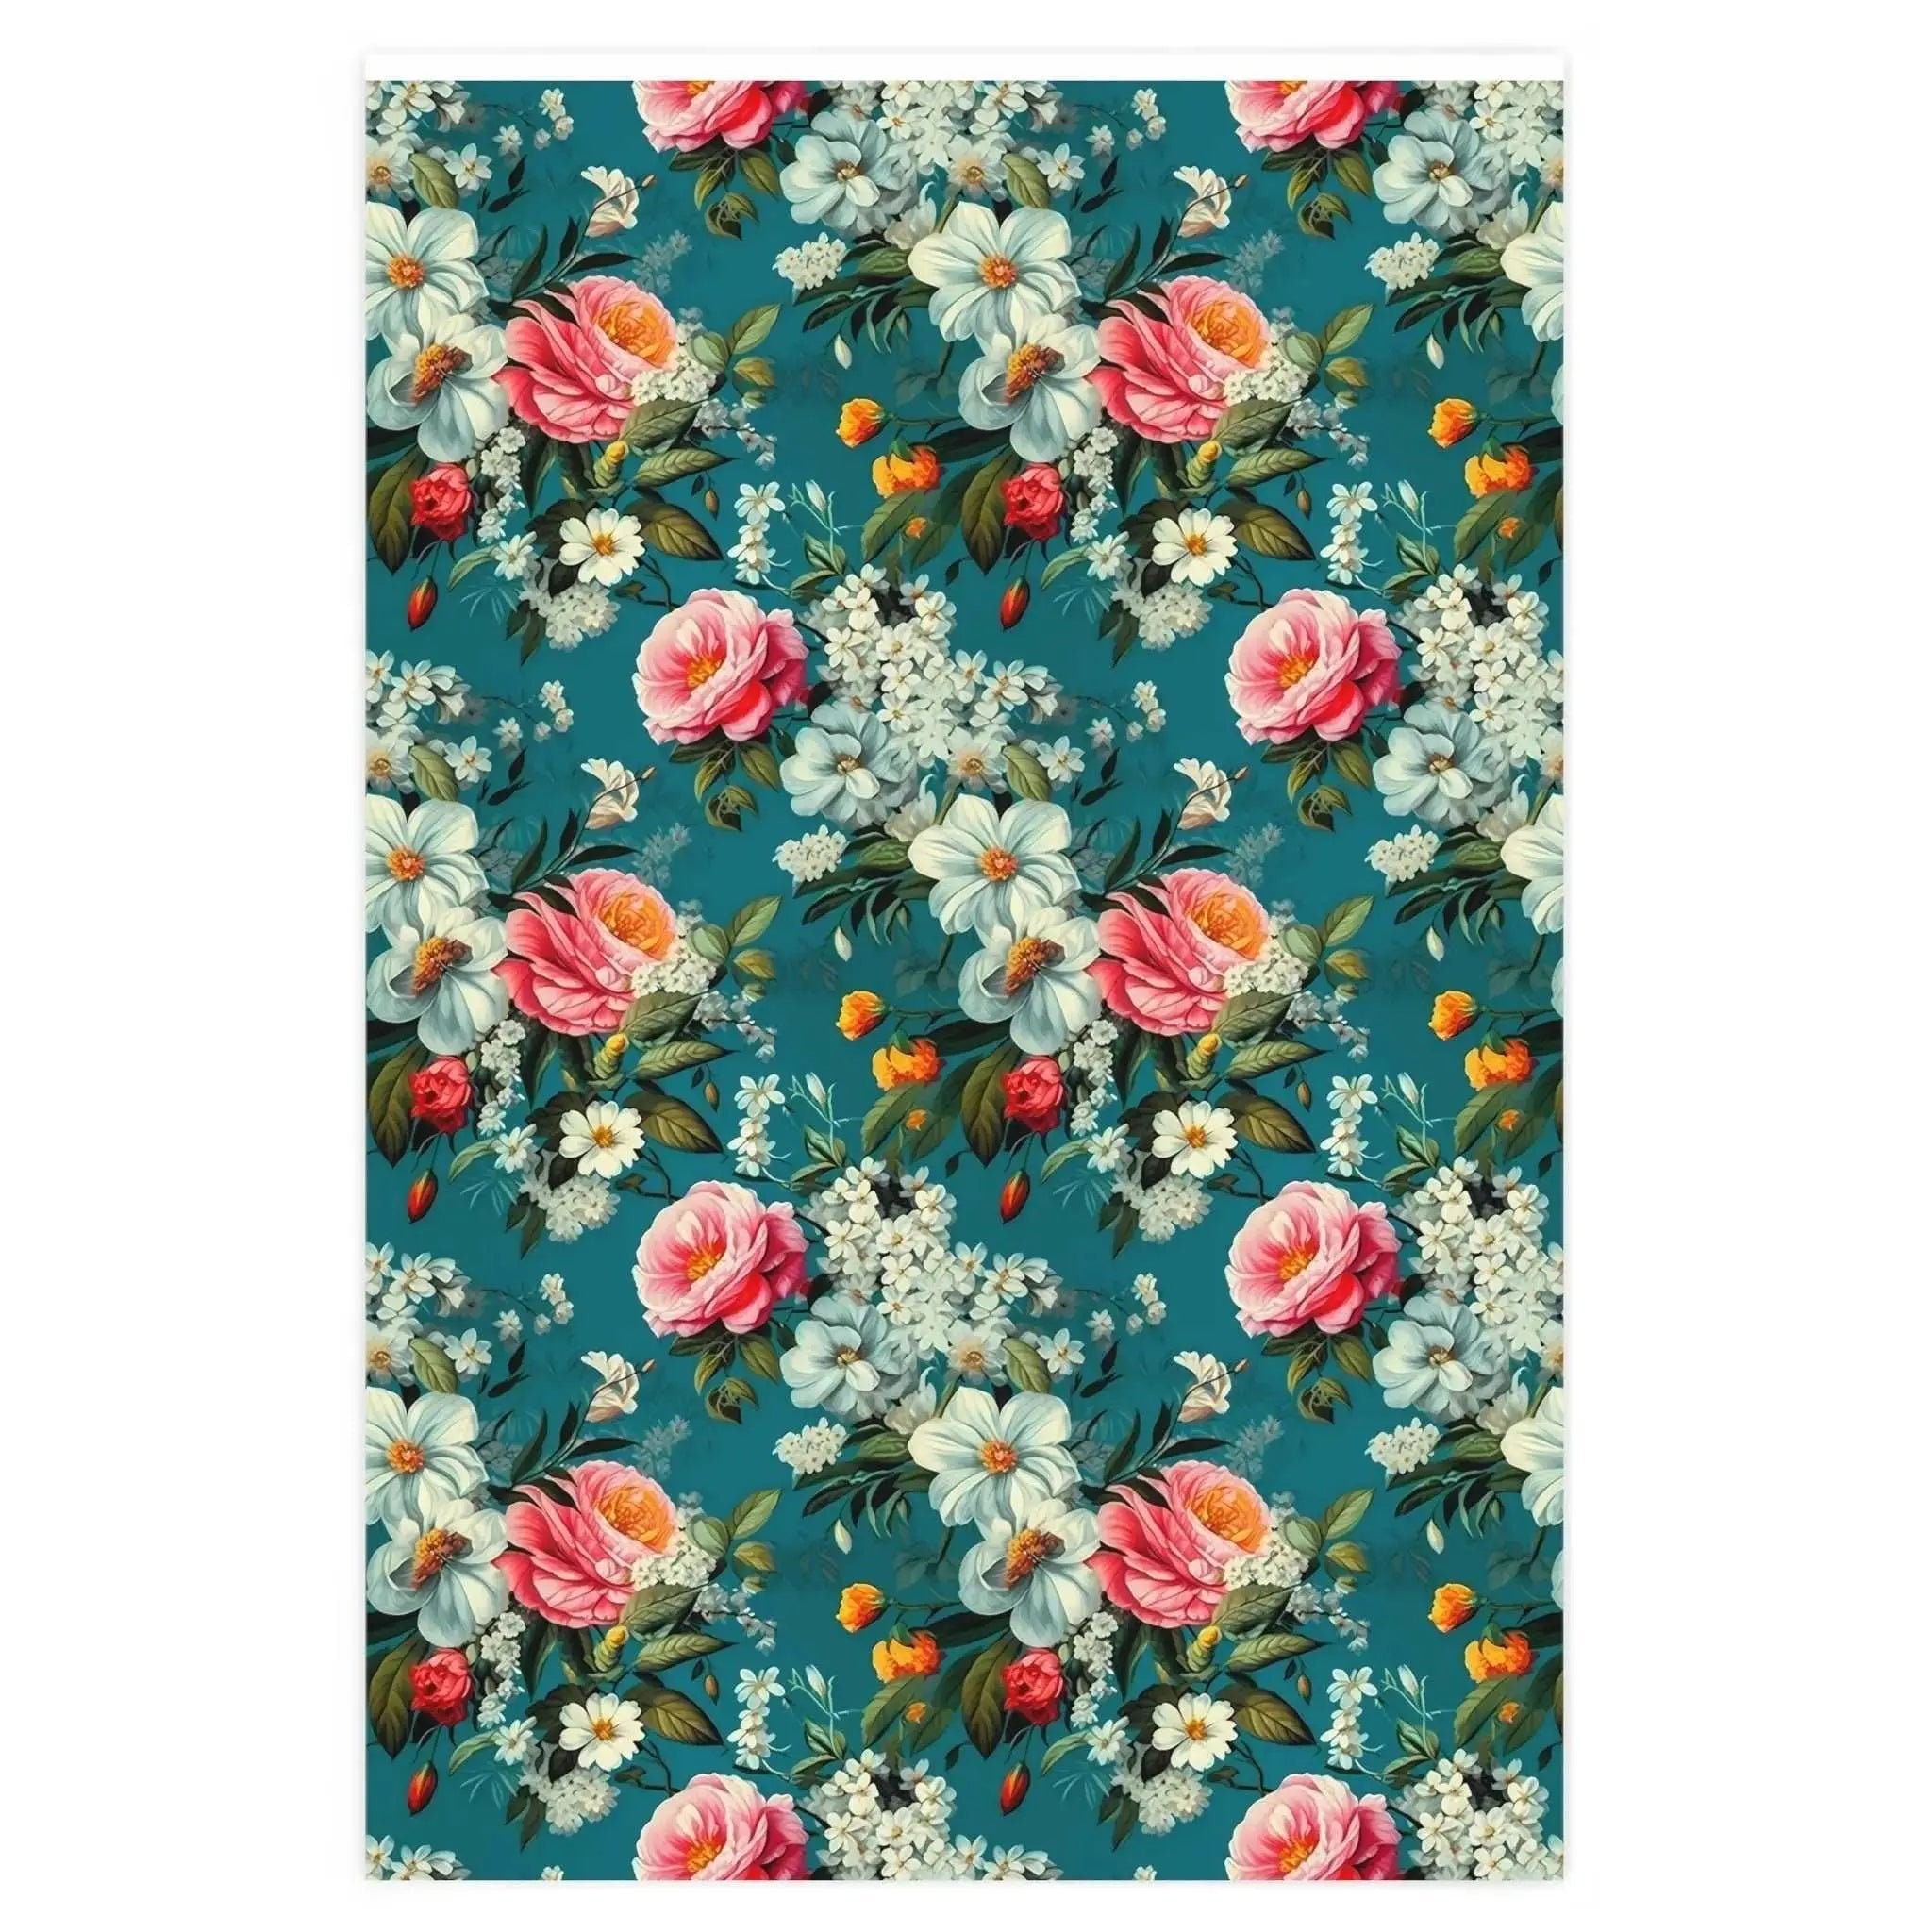 Southern Flowers Wrapping Paper Roll